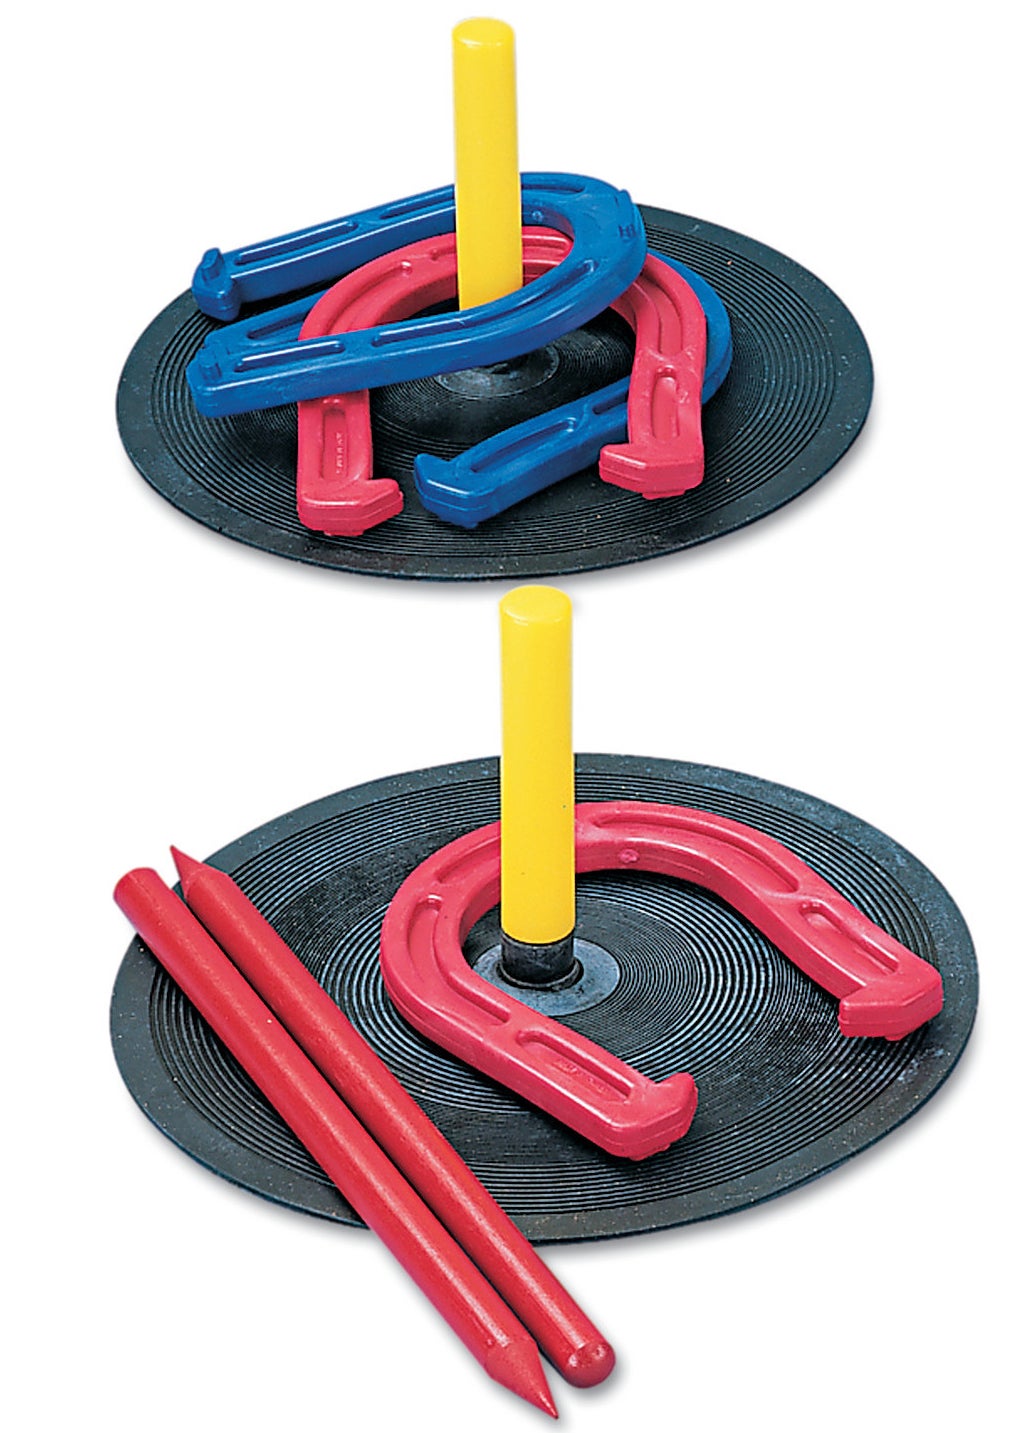 red and blue rubber horseshoes set